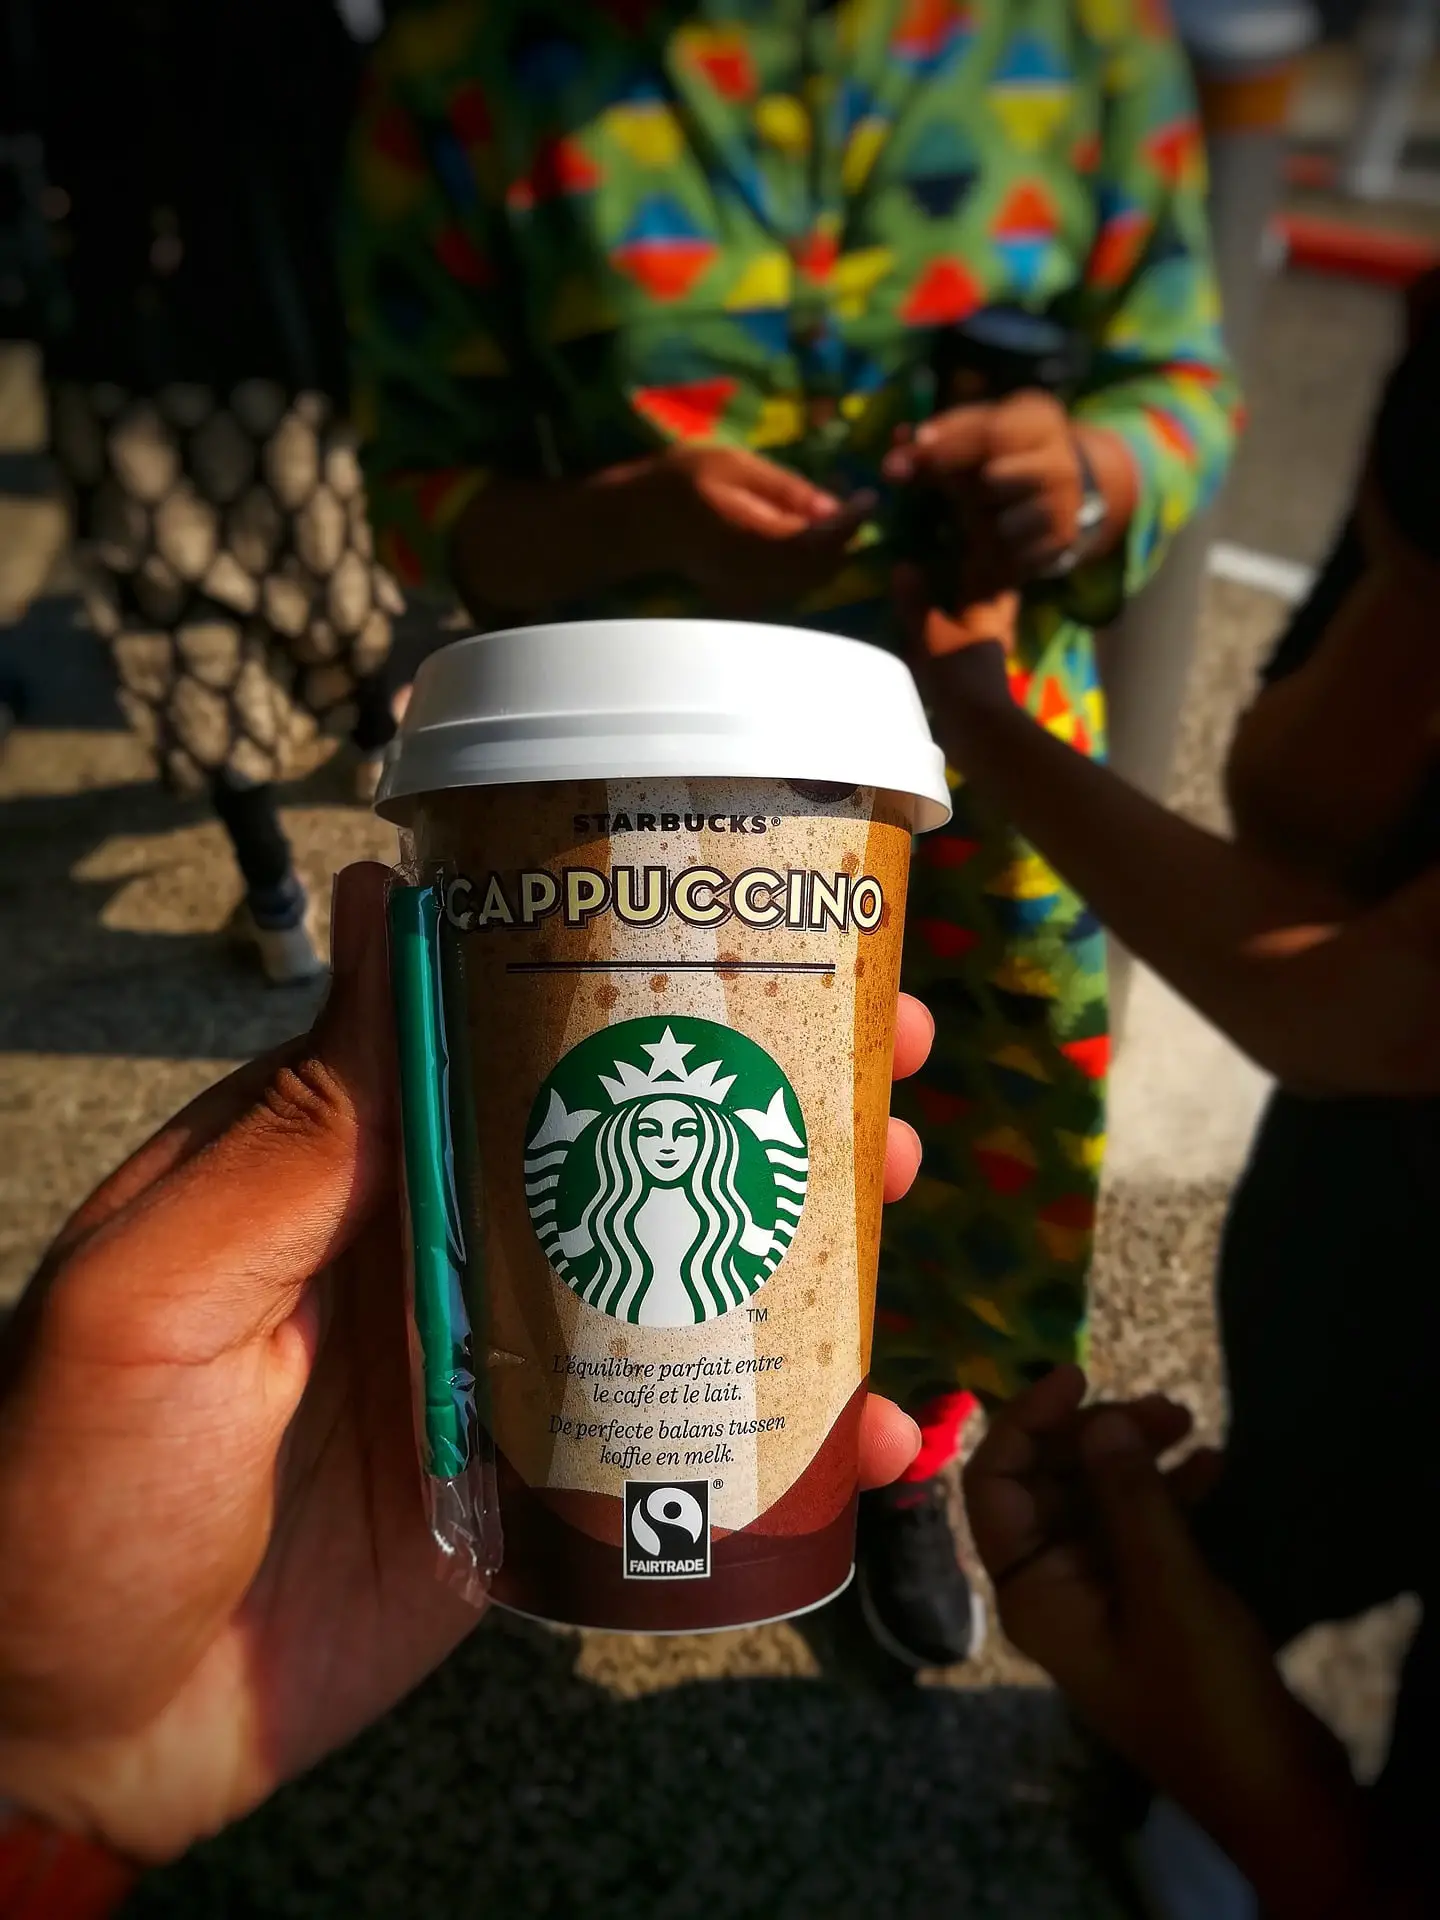 Starbucks' Value Chain also involves investing in technology and innovations to make products that are of value to the customers.